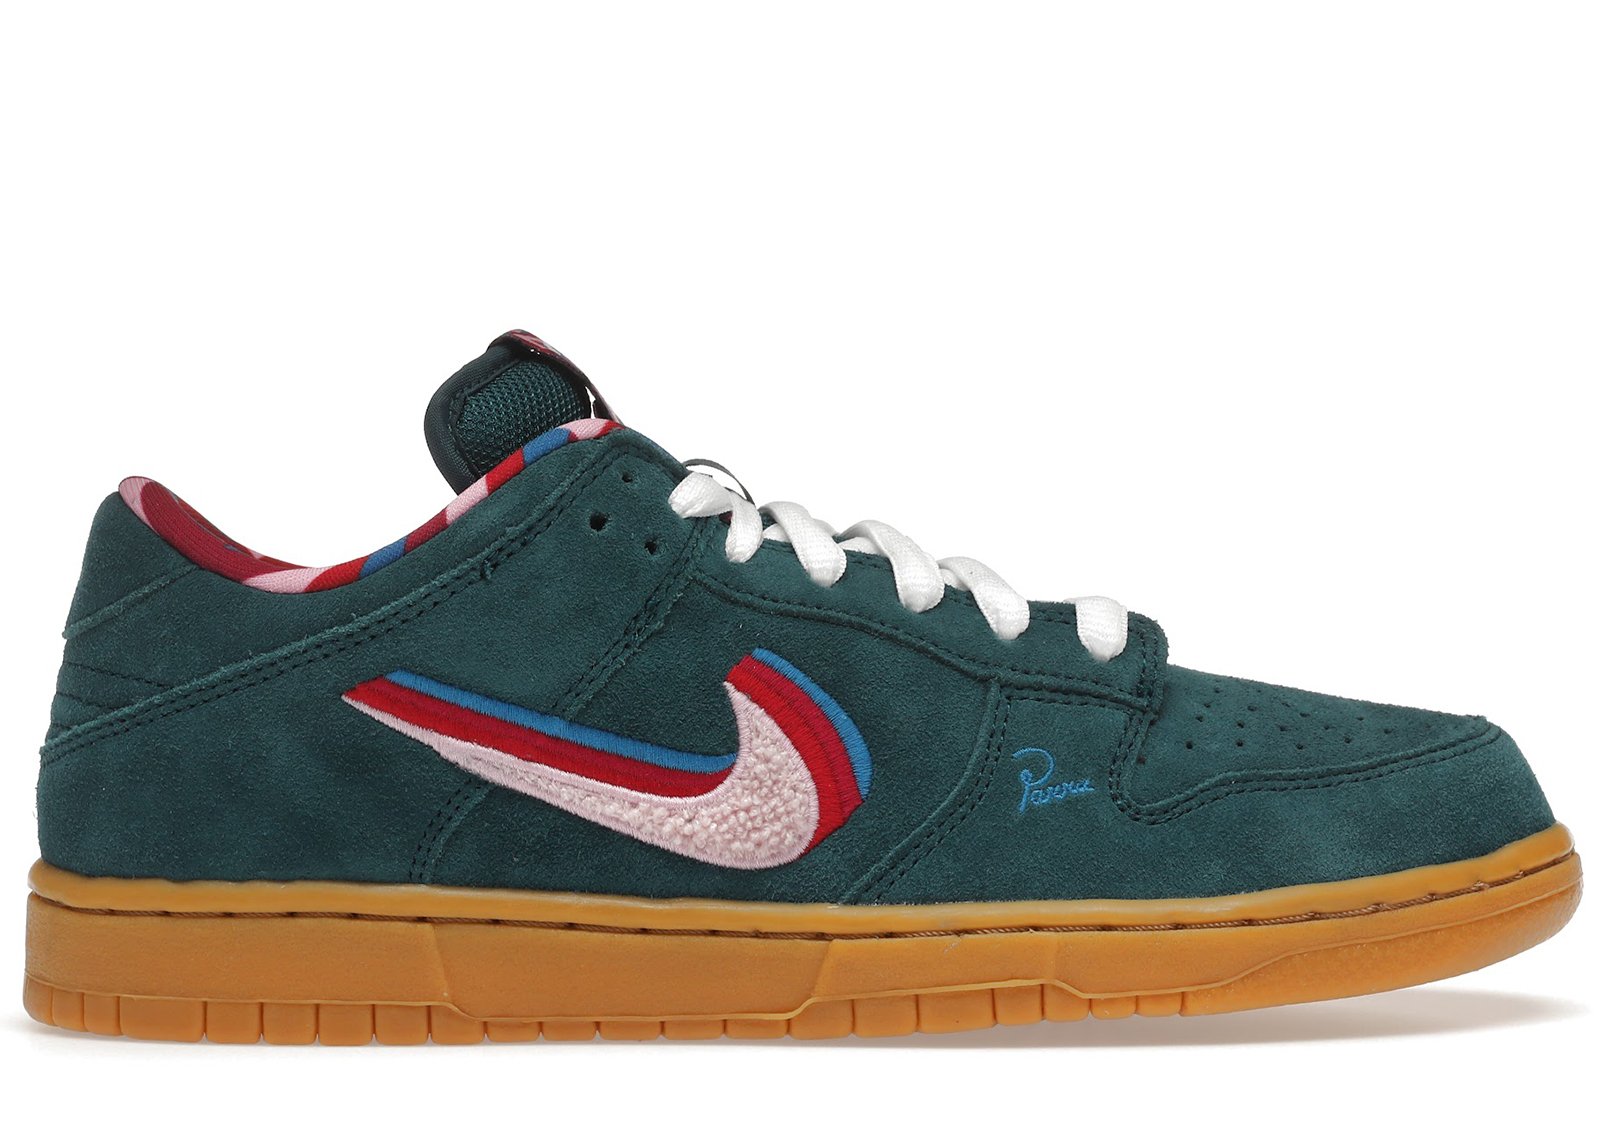 Nike SB Dunk Low Parra (Friends and Family) (2019) sneakers